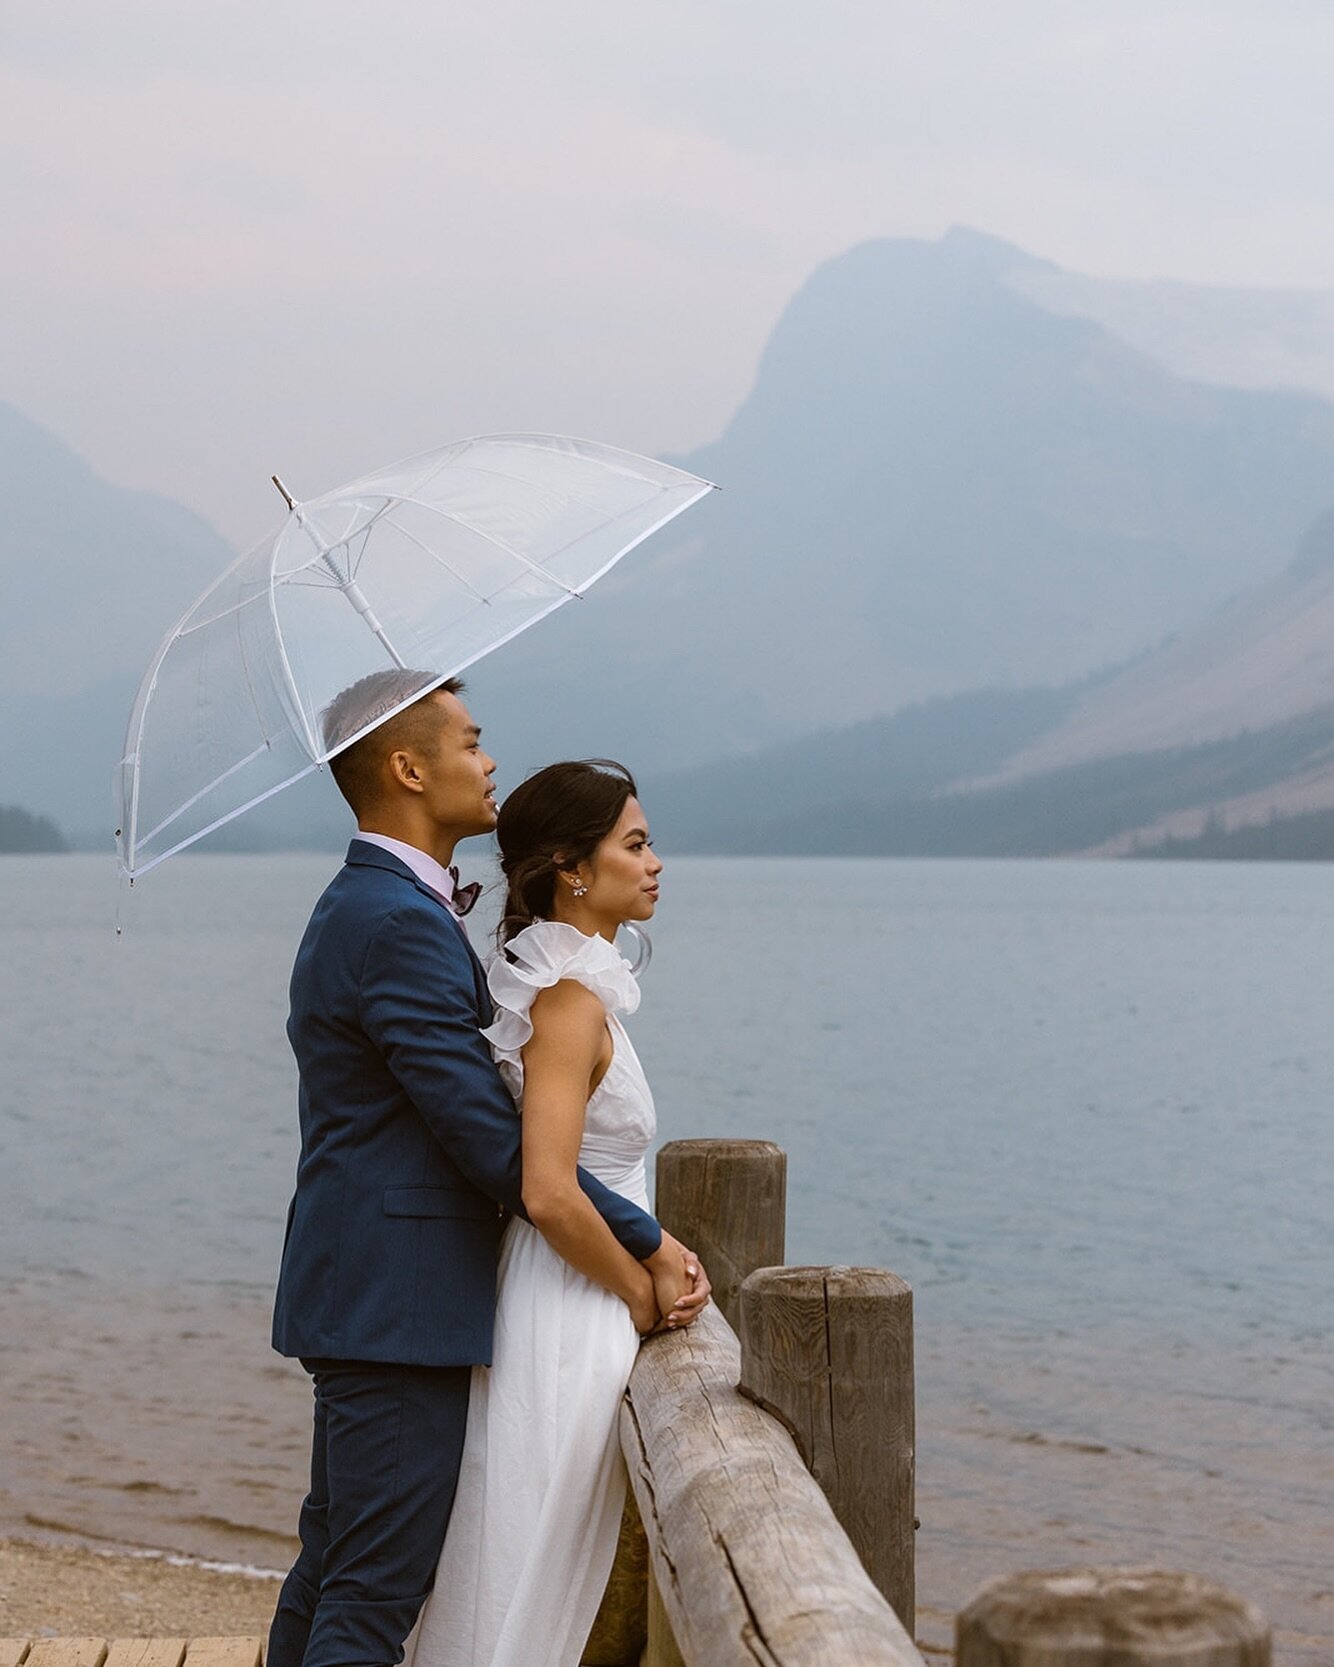 V&amp;F 🤍💍
In all honesty, we all didn&rsquo;t expect the weather to be gloomy and rainy but nonetheless, it all came together beautifully! Wowwwww 😍🤩
I love the clear umbrella for this photo so much and the mountain viewssss! What a vibe ✨✨✨

Ph